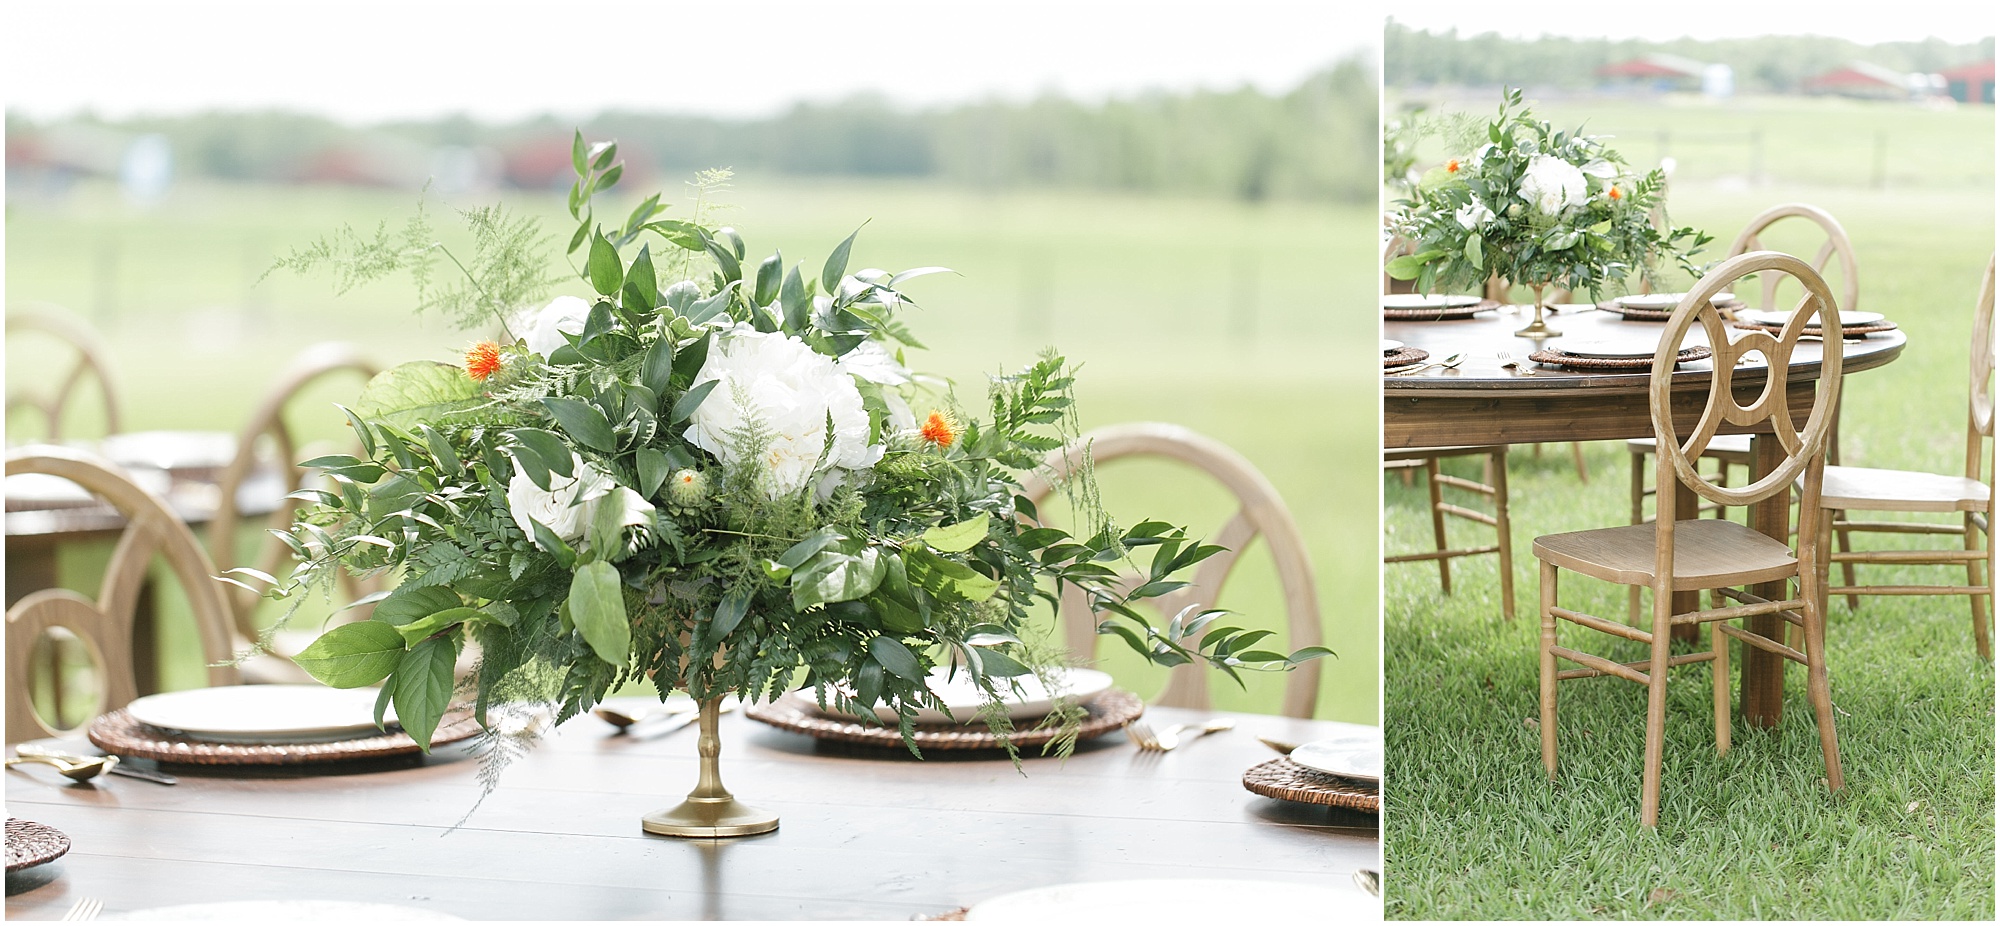 Centerpieces and wood chairs at an outdoor reception. 